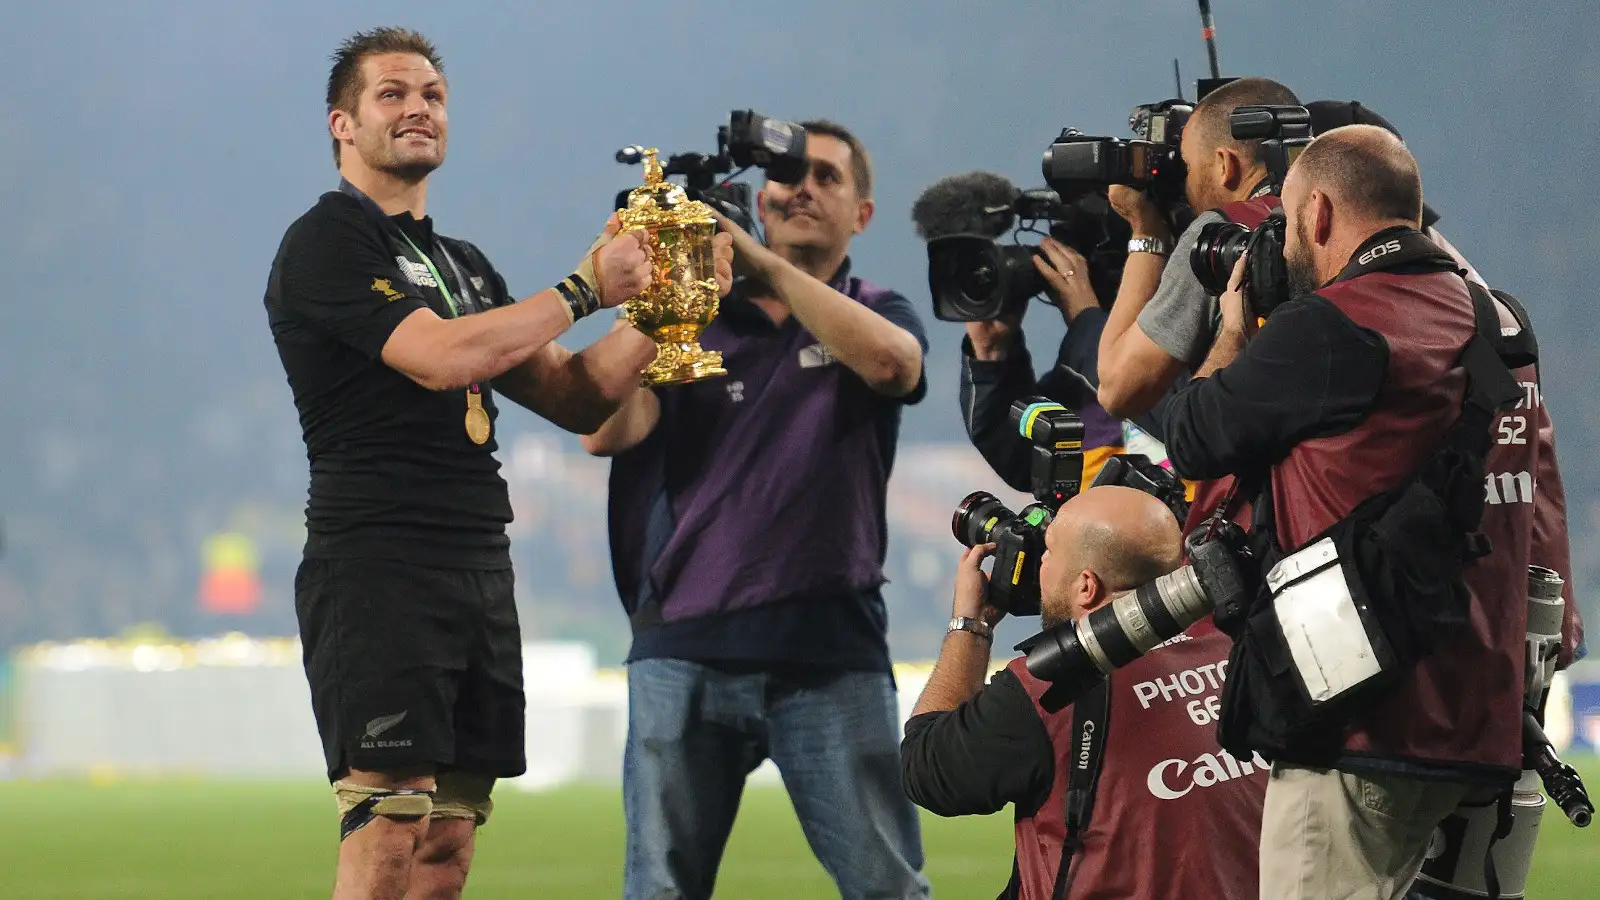 Richie McCaw with Rugby World Cup